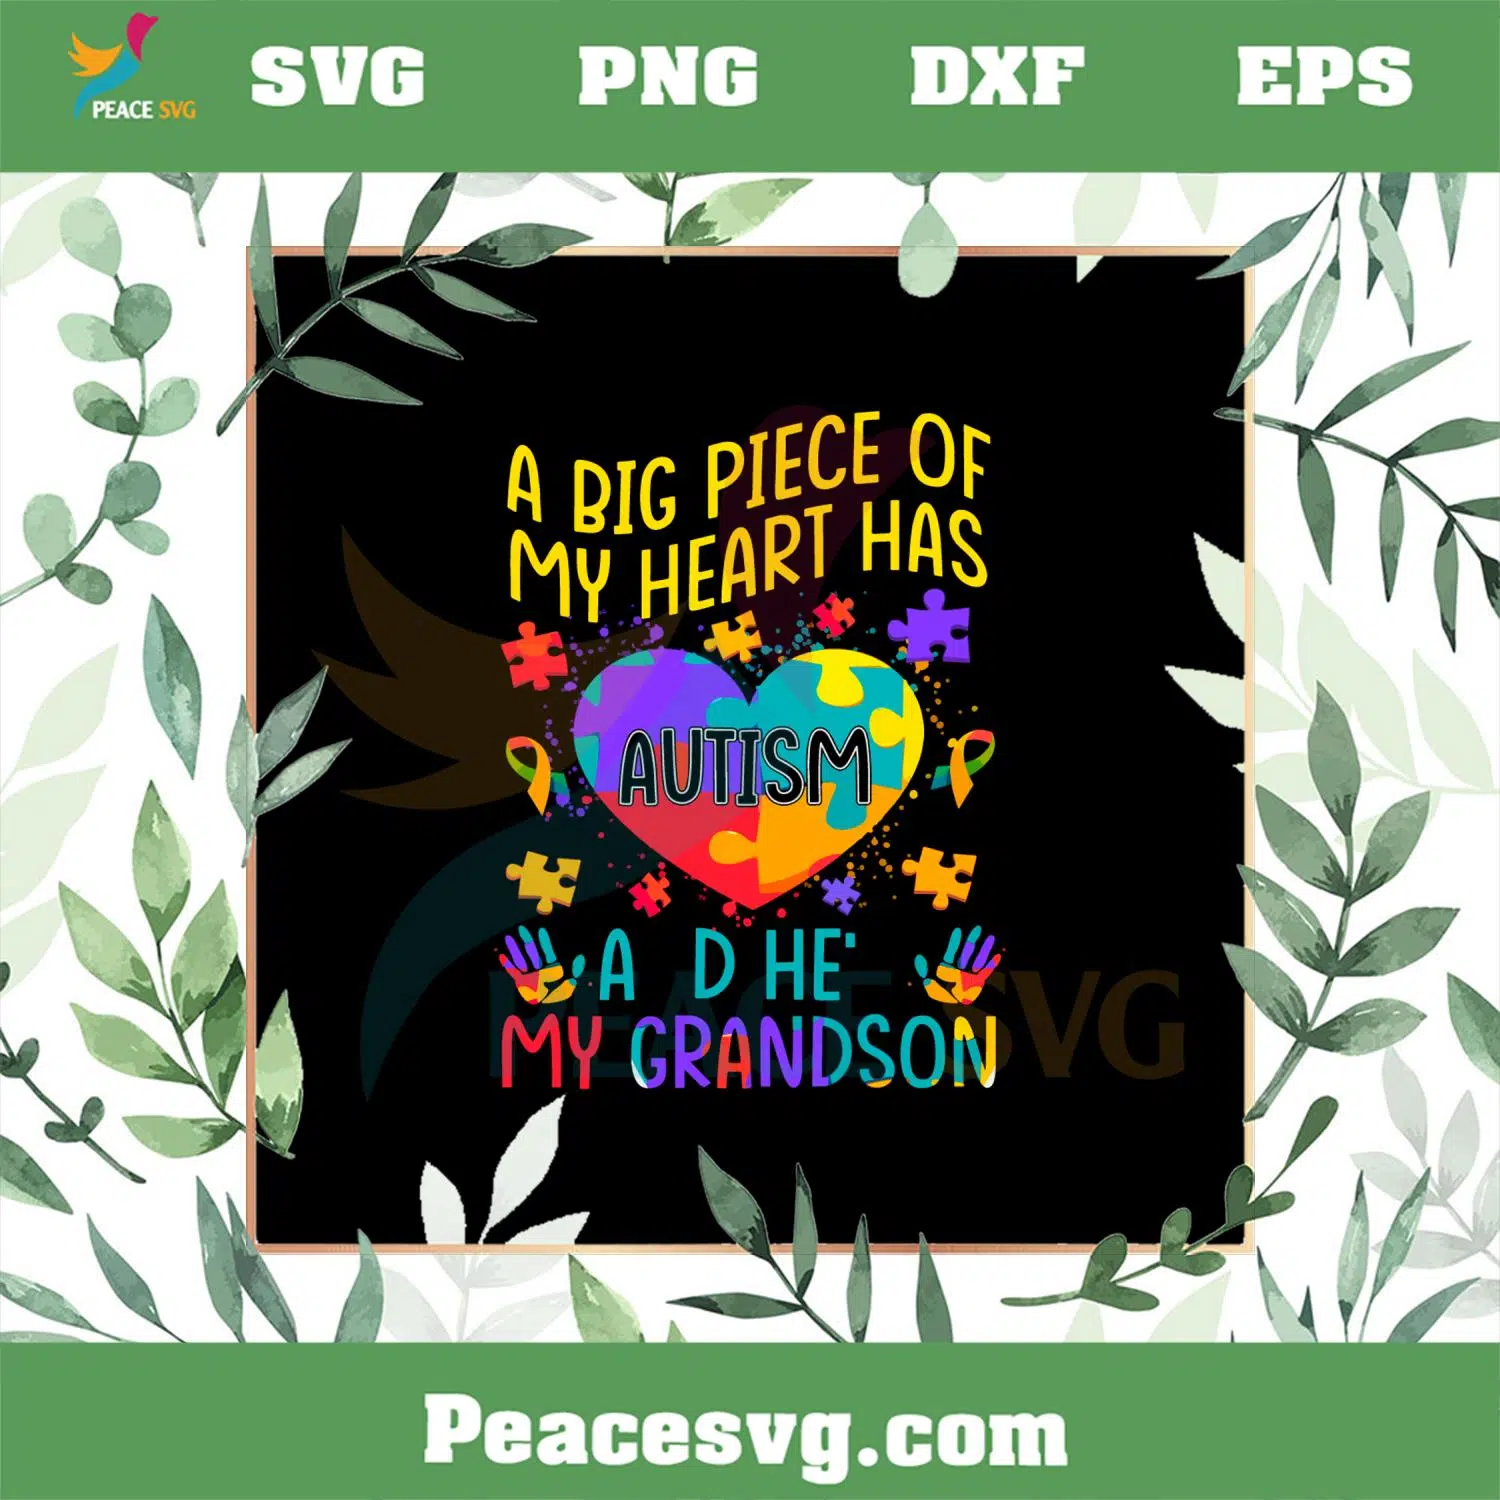 A Big Piece Of My Heart Has Autism And He’s My Grandson SVG Cutting Files